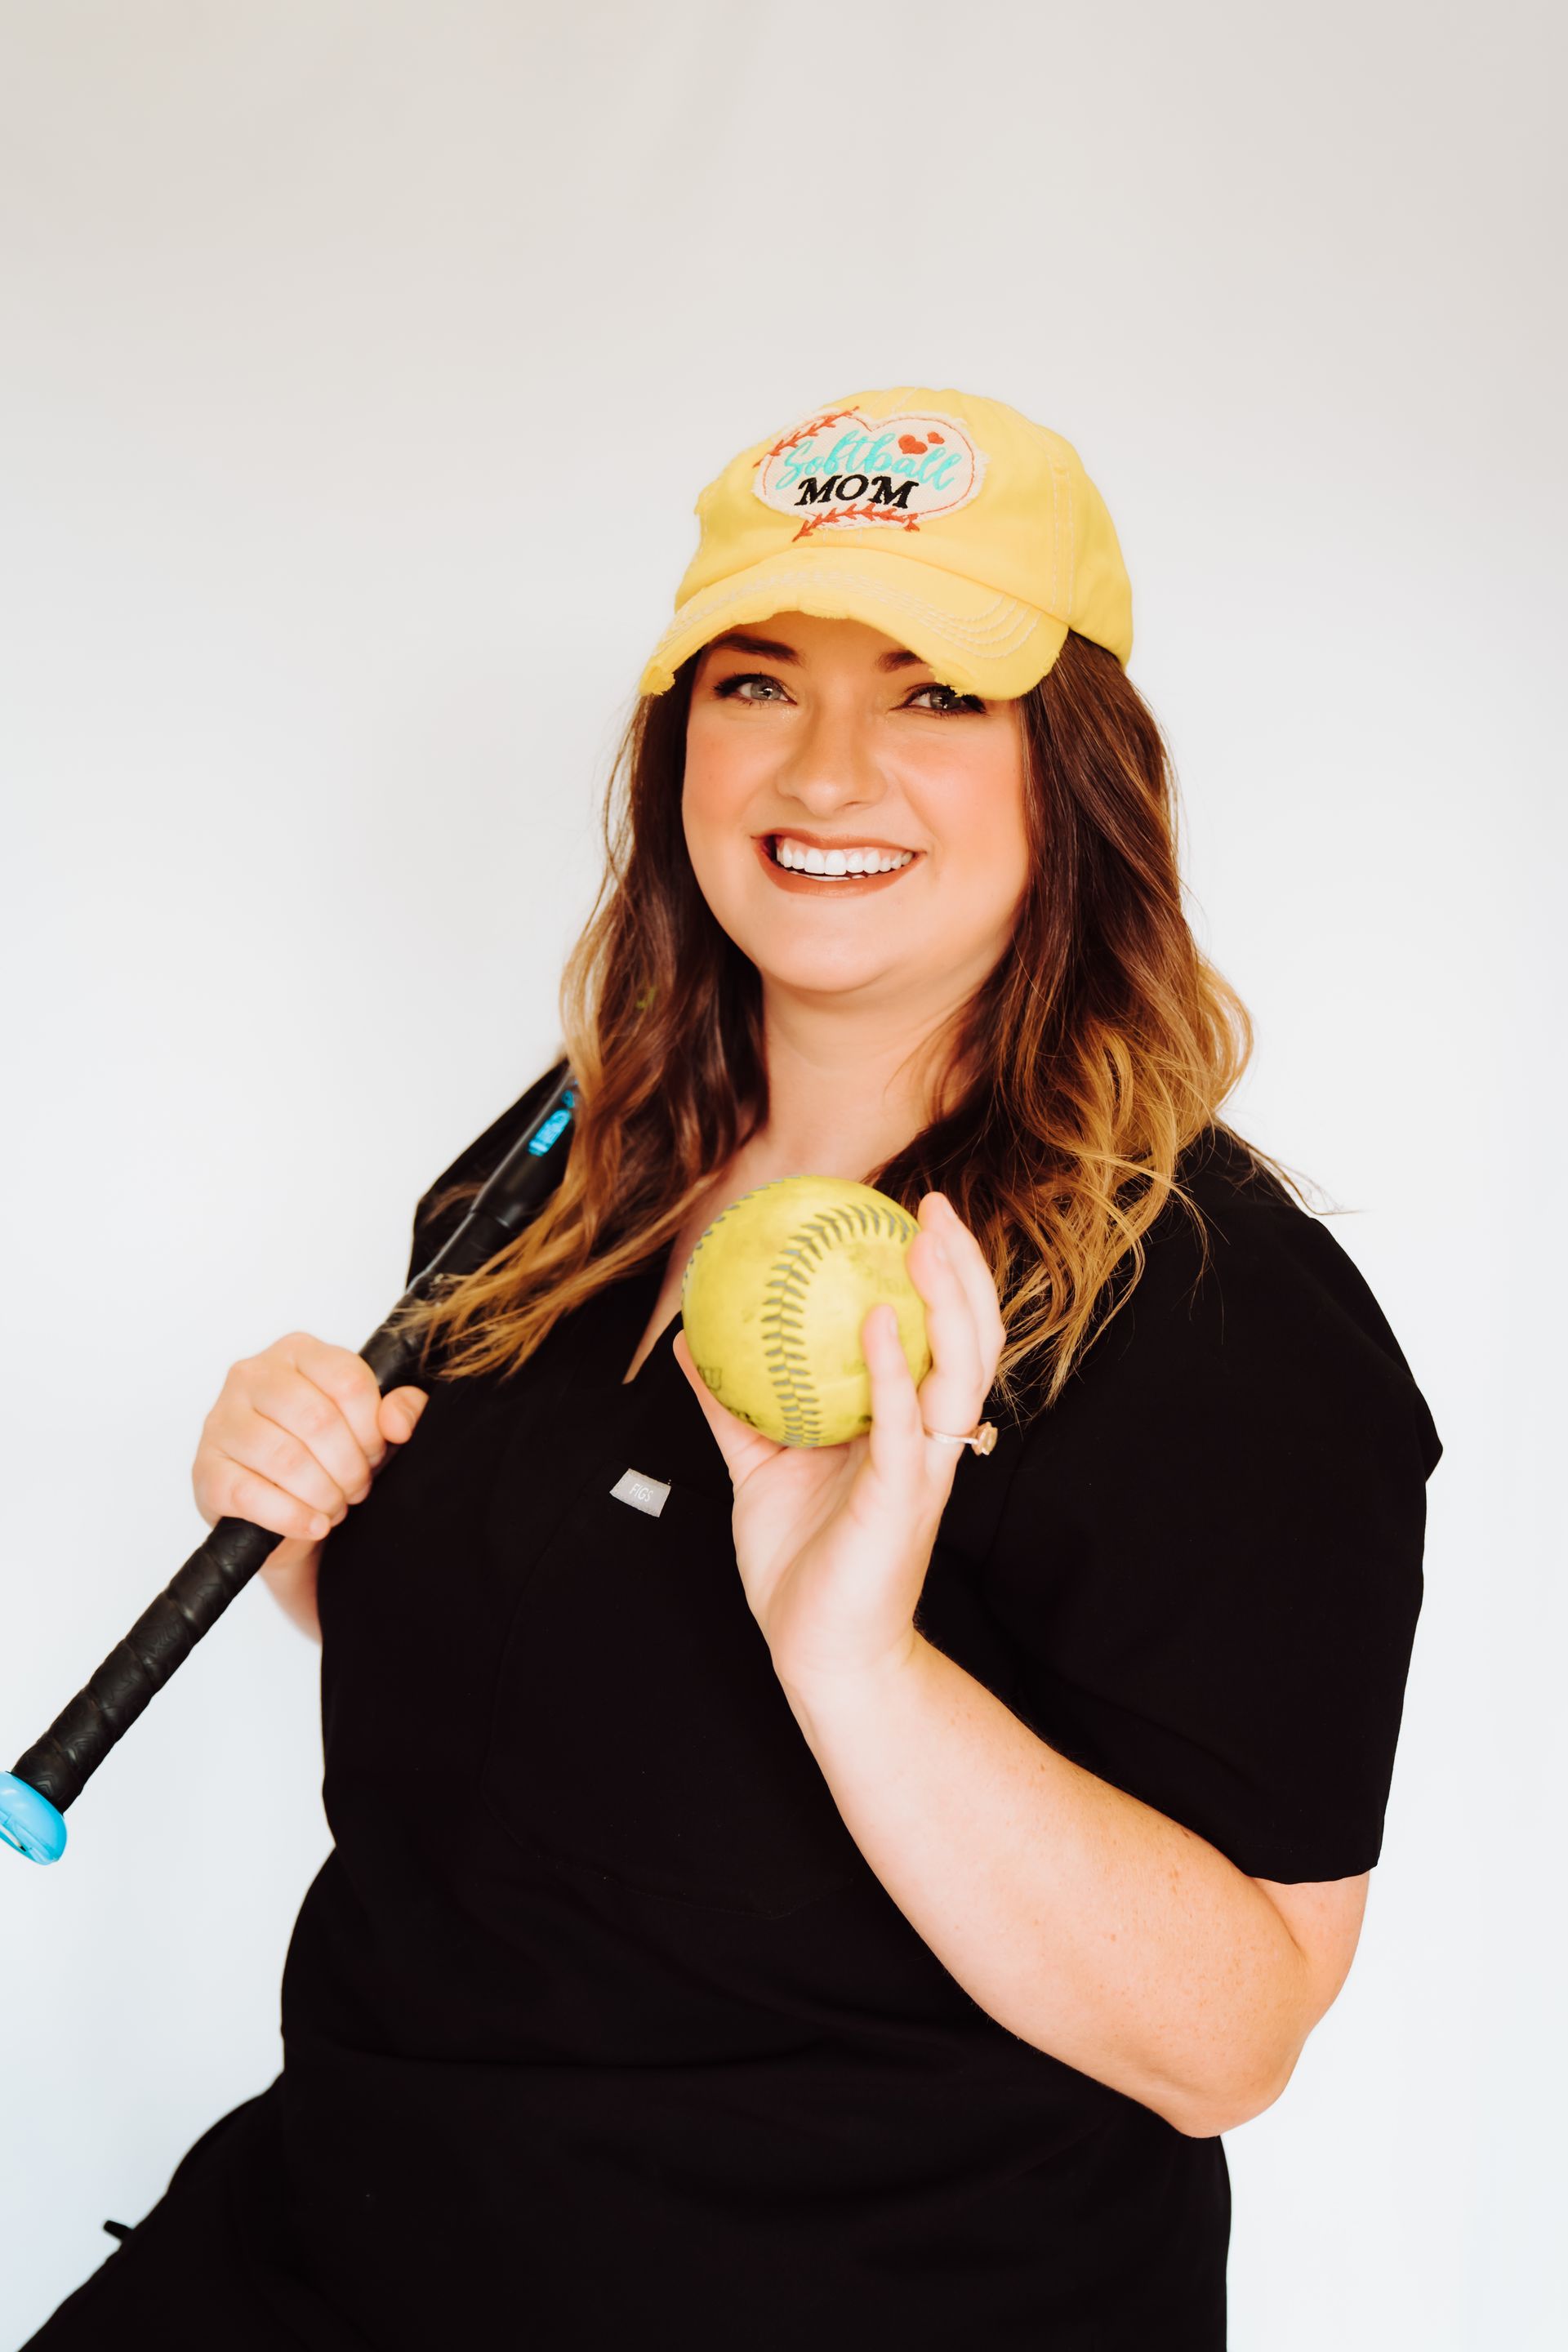 a woman wearing a yellow hat is holding a softball and a bat .